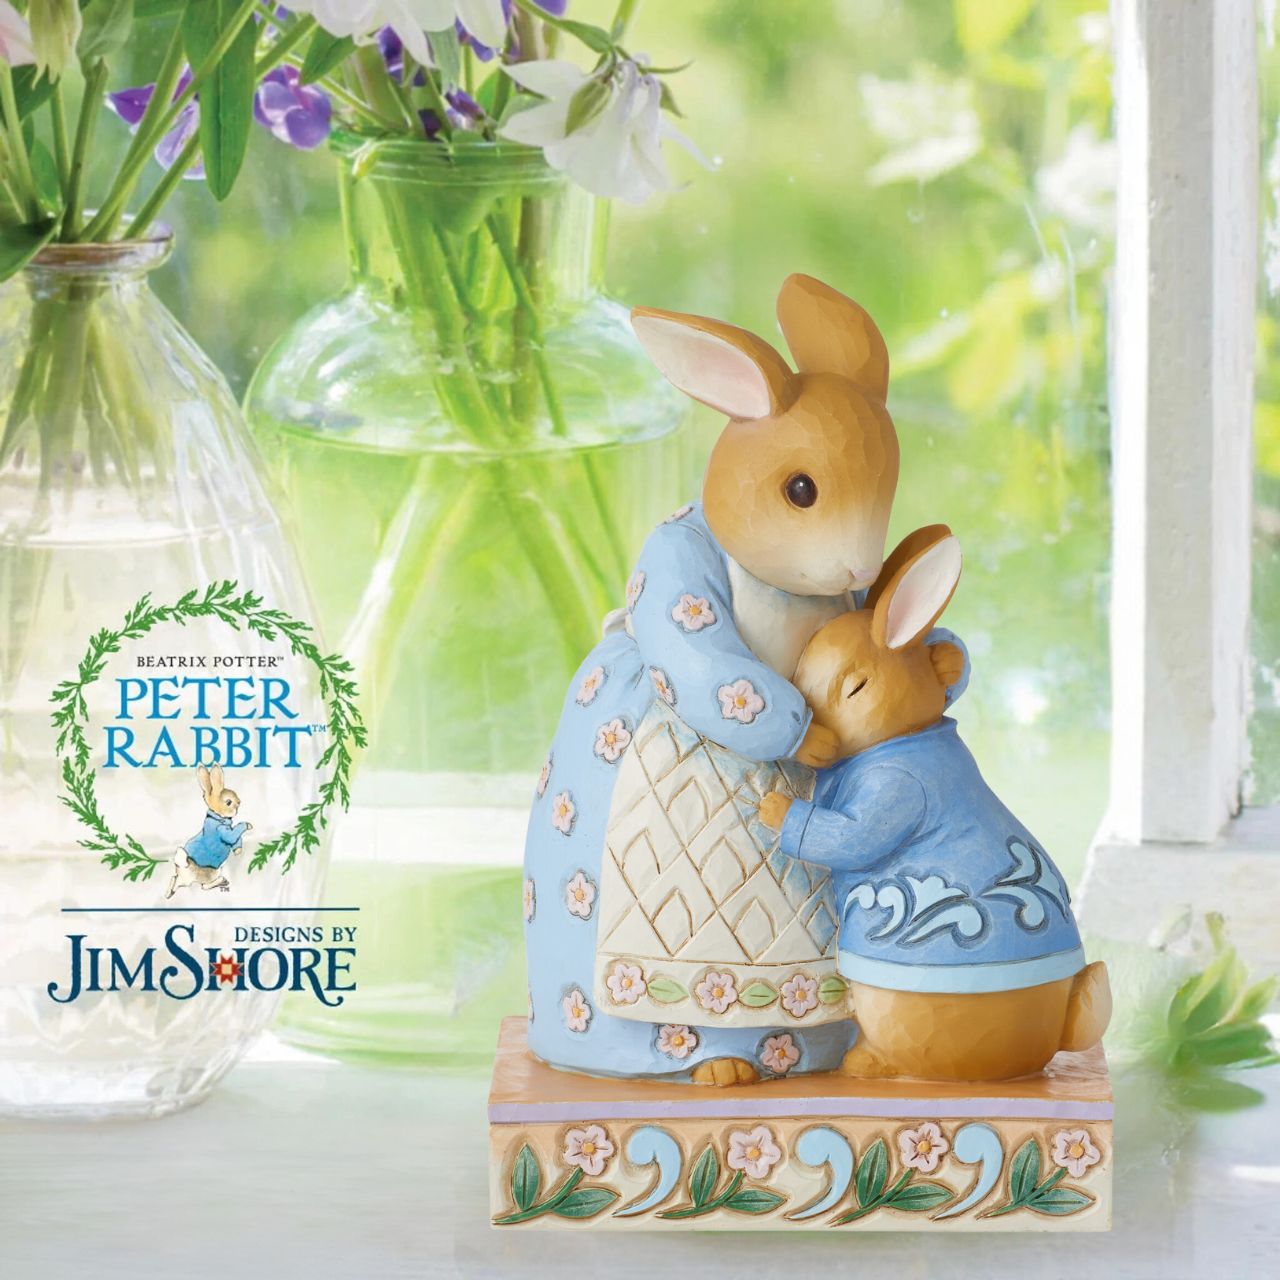 Jim Shore uplifts the treasured children's characters in this darling miniature. Beloved bunny, Peter Rabbit, melts into his mother's caring embrace. Holding her sweet boy close, she provides all the encouragement he needs for a day of adventuring.